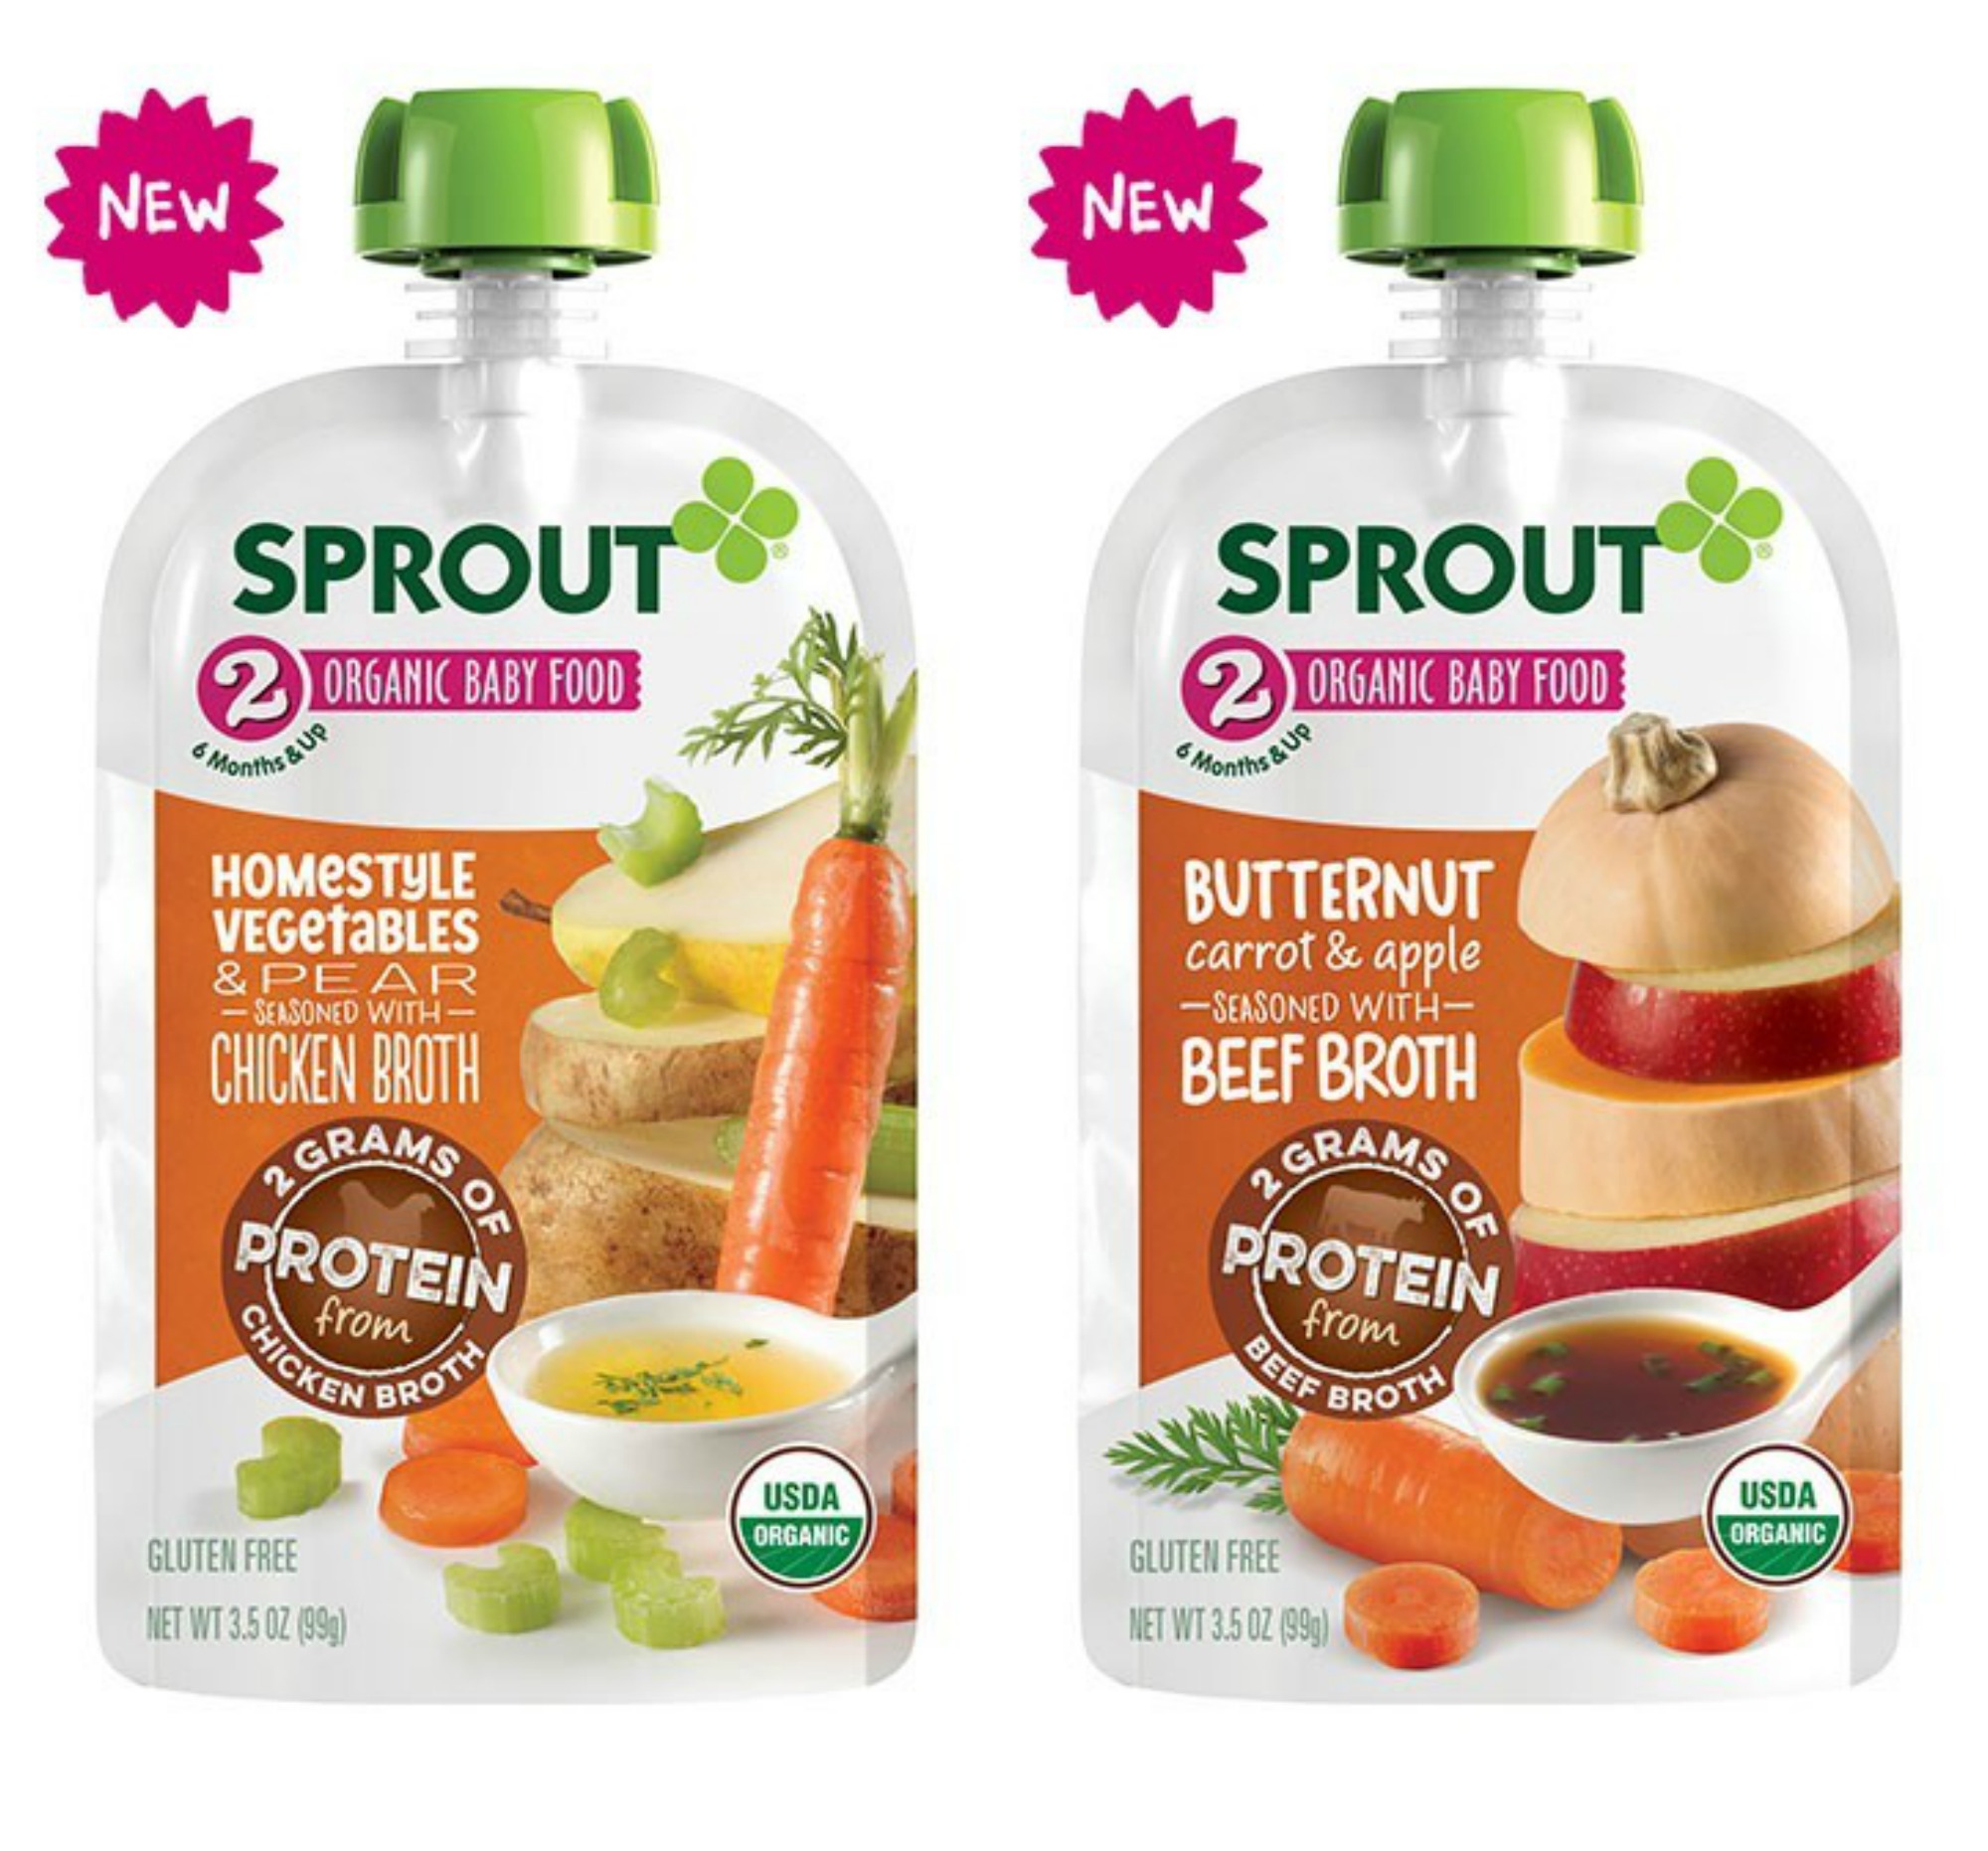 Super Deals On Sprout Pouches This Week At Publix - Try New Smoothies & Bone Broth Protein Pouches on I Heart Publix 1